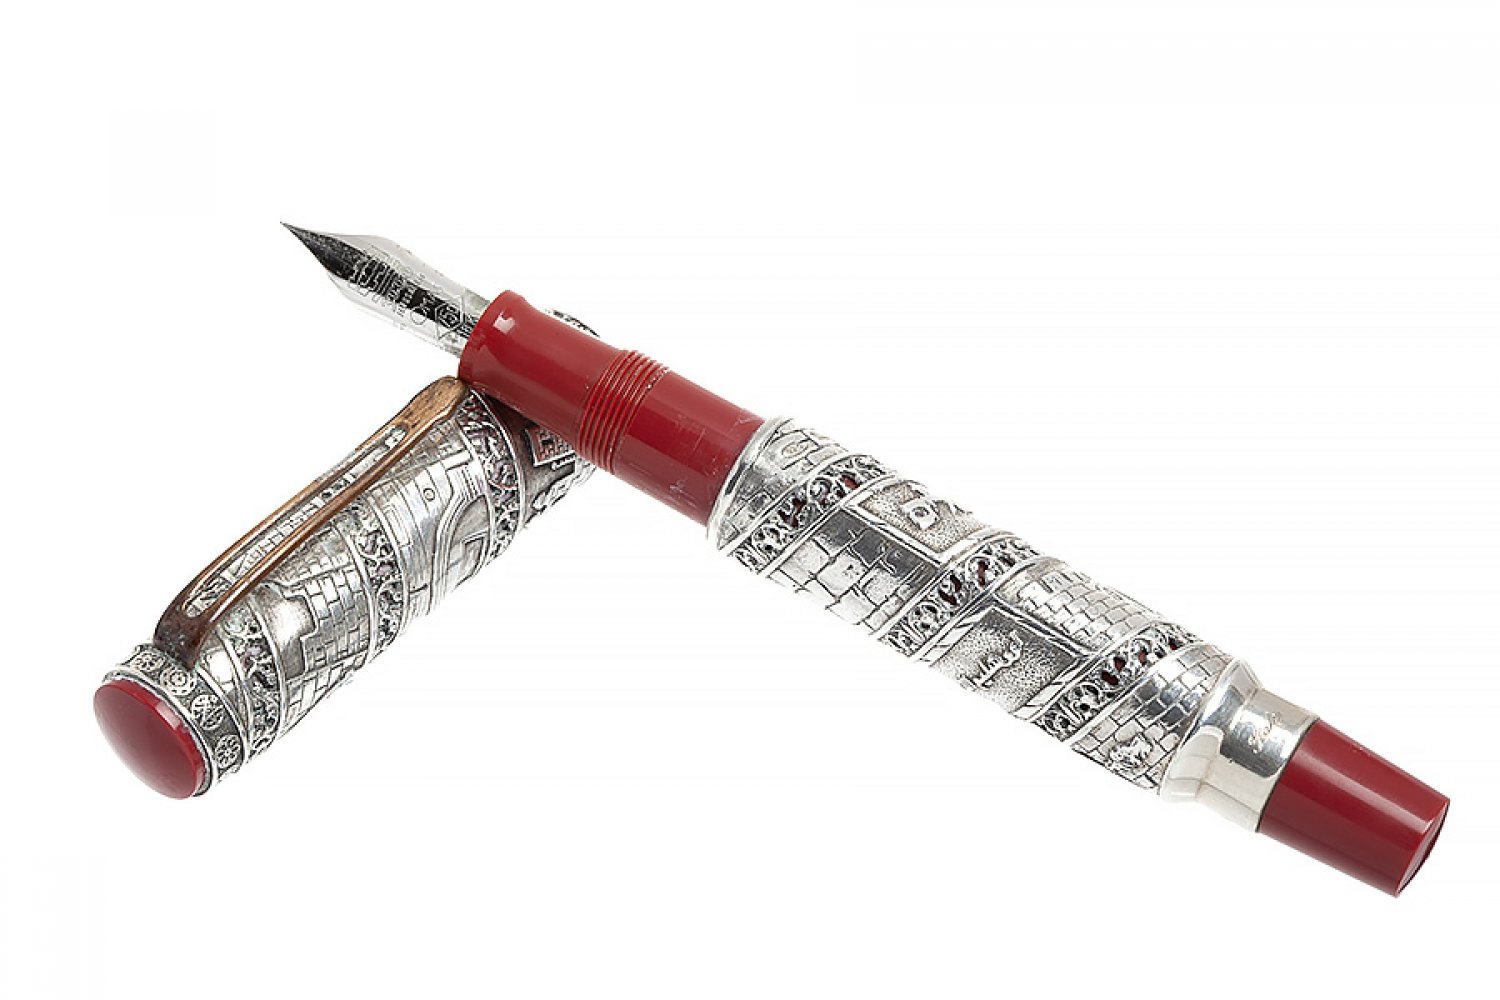 OMAS "JESURALEM 3000" FOUNTAIN PEN.Coral resin and silver barrel.Limited edition. Exemplary 0973.Nib - Image 3 of 3